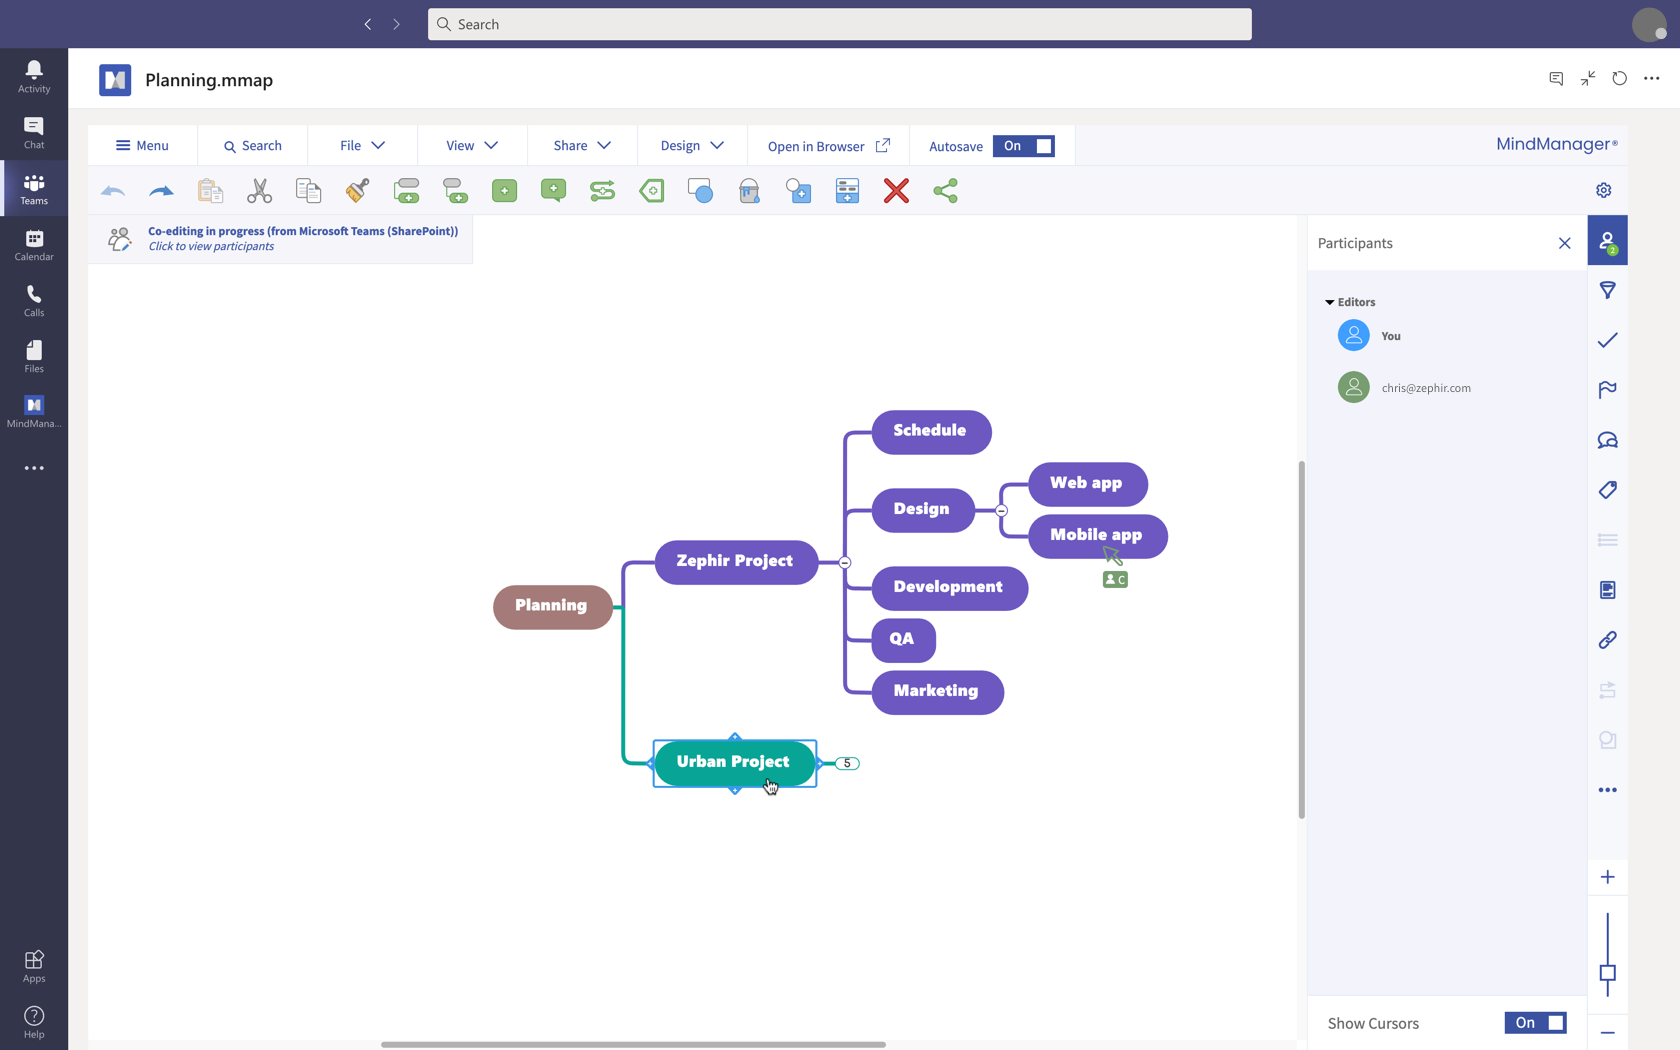 Co-editing in MindManager for Microsoft Teams